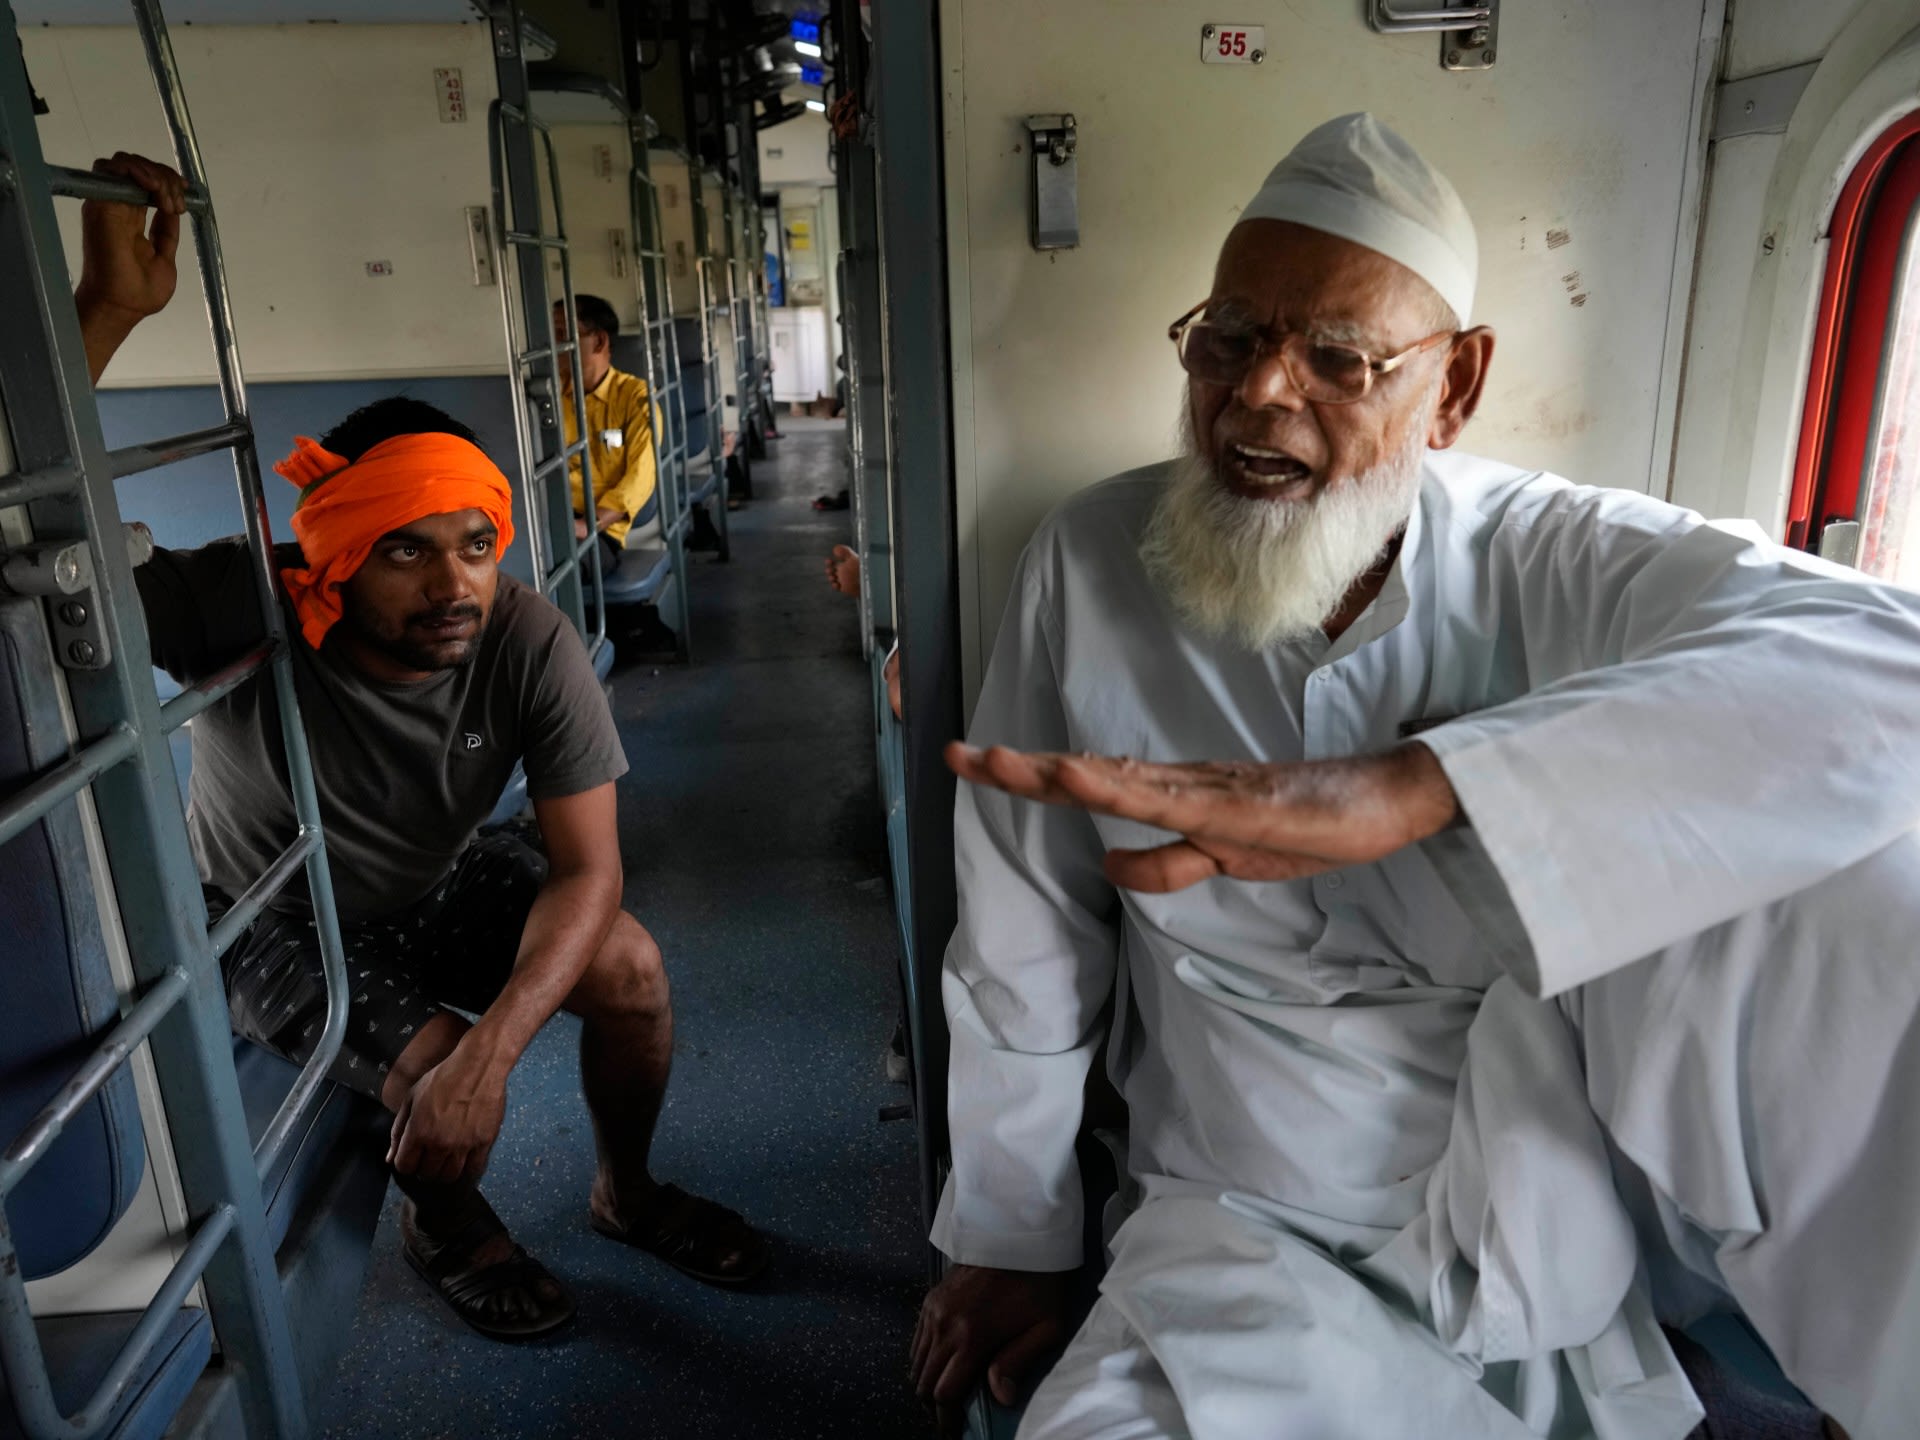 On one of India’s longest train rides, ongoing election divides passengers